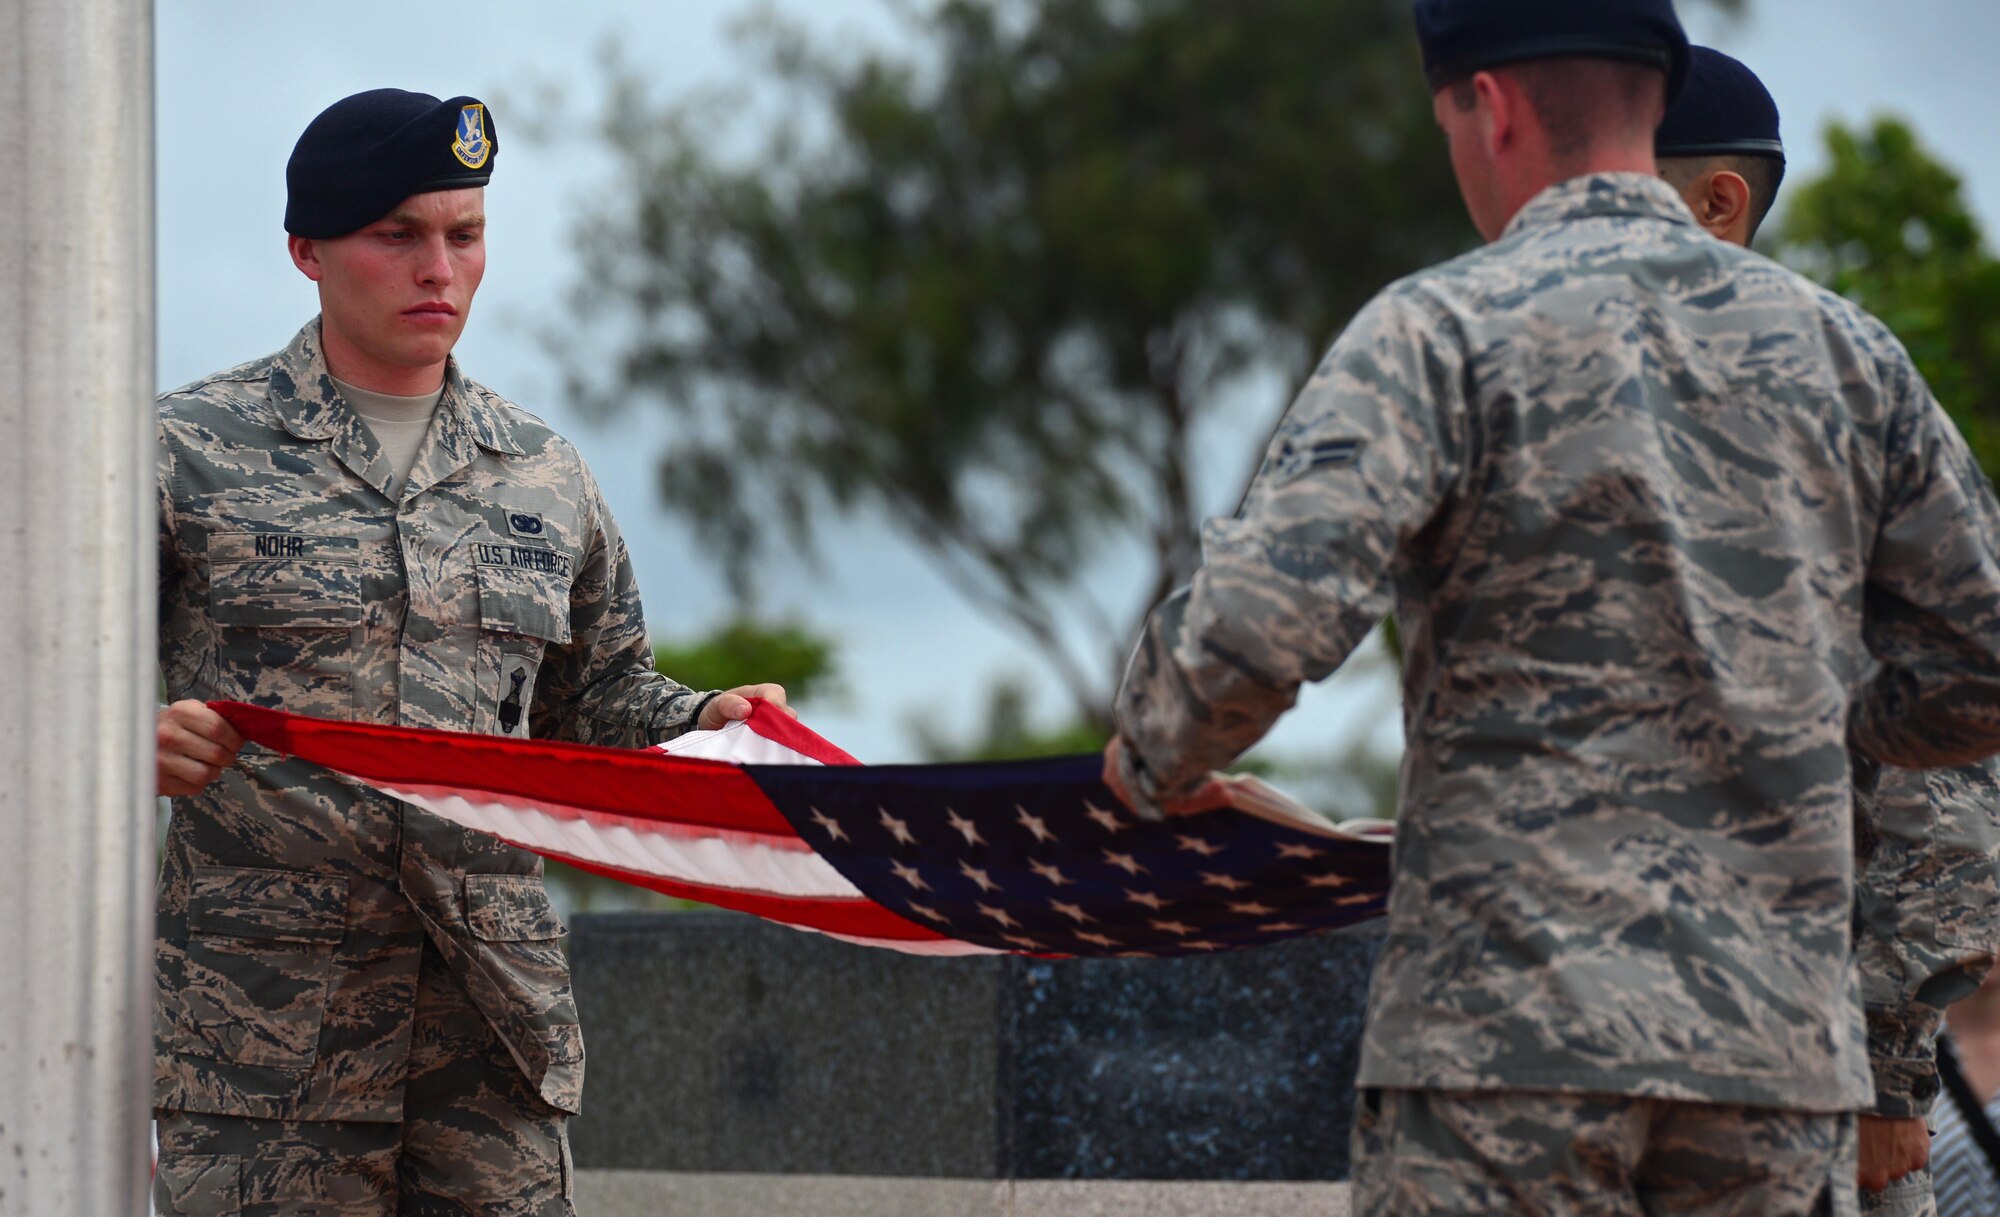 Airmen from the 36th Security Forces Squadron fold the American flag during a retreat ceremony May 20, 2016, at Andersen Air Force Base, Guam. The ceremony was one of several events during Police Week in which Andersen Airmen honored their fallen wingmen. (U.S. Air Force photo by Senior Airman Joshua Smoot)